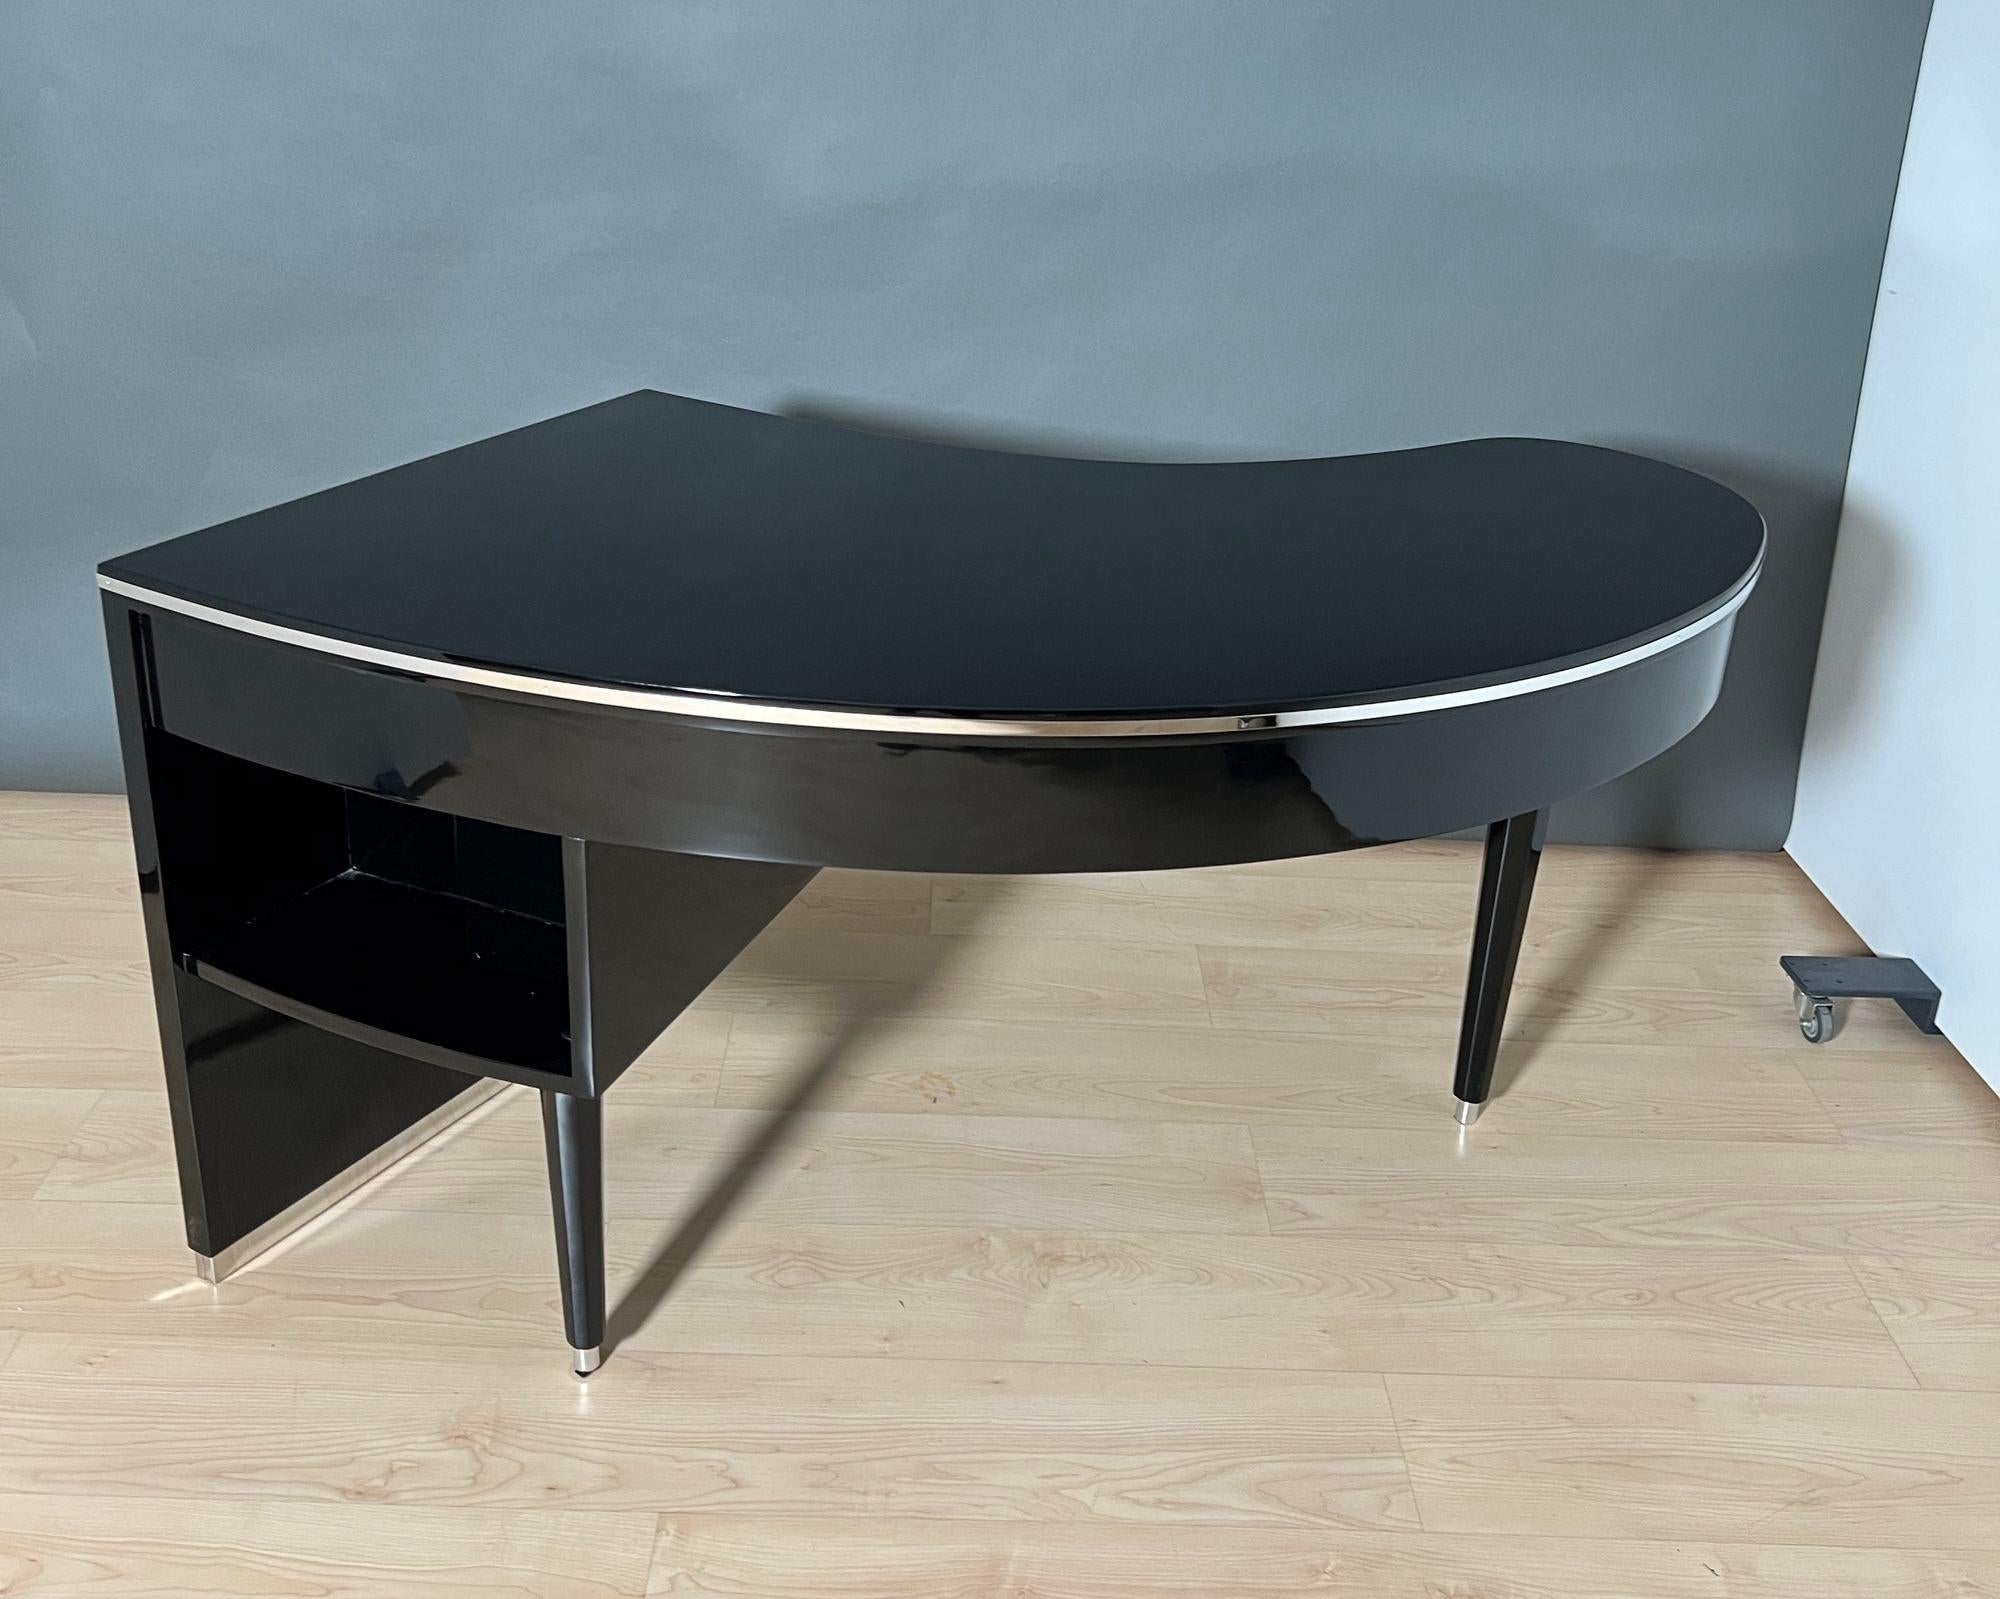 Mid-20th Century Design Desk, Curved Top, Piano Lacquer, Chrome, France, 1950s For Sale